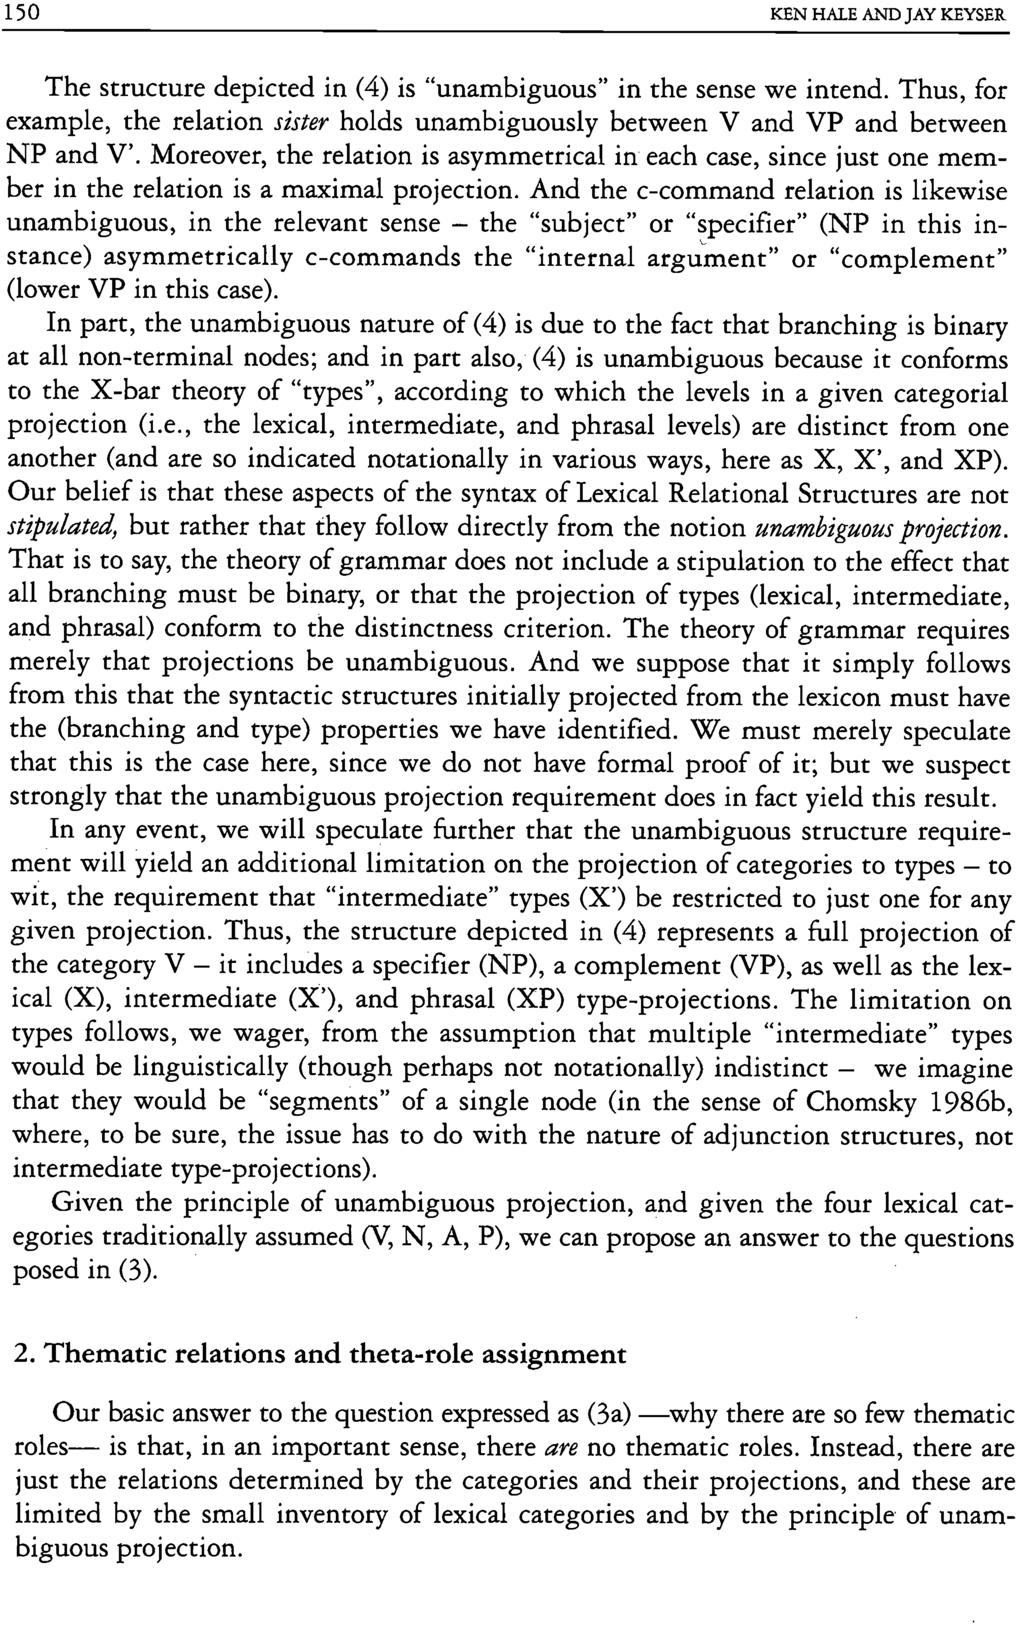 150 KEN HALE AND JAY KEYSER The structure depicted in (4) is "unambiguous" in the sense we intend. Thus, for example, the relation sister holds unambiguously between V and VP and between NP and V'.